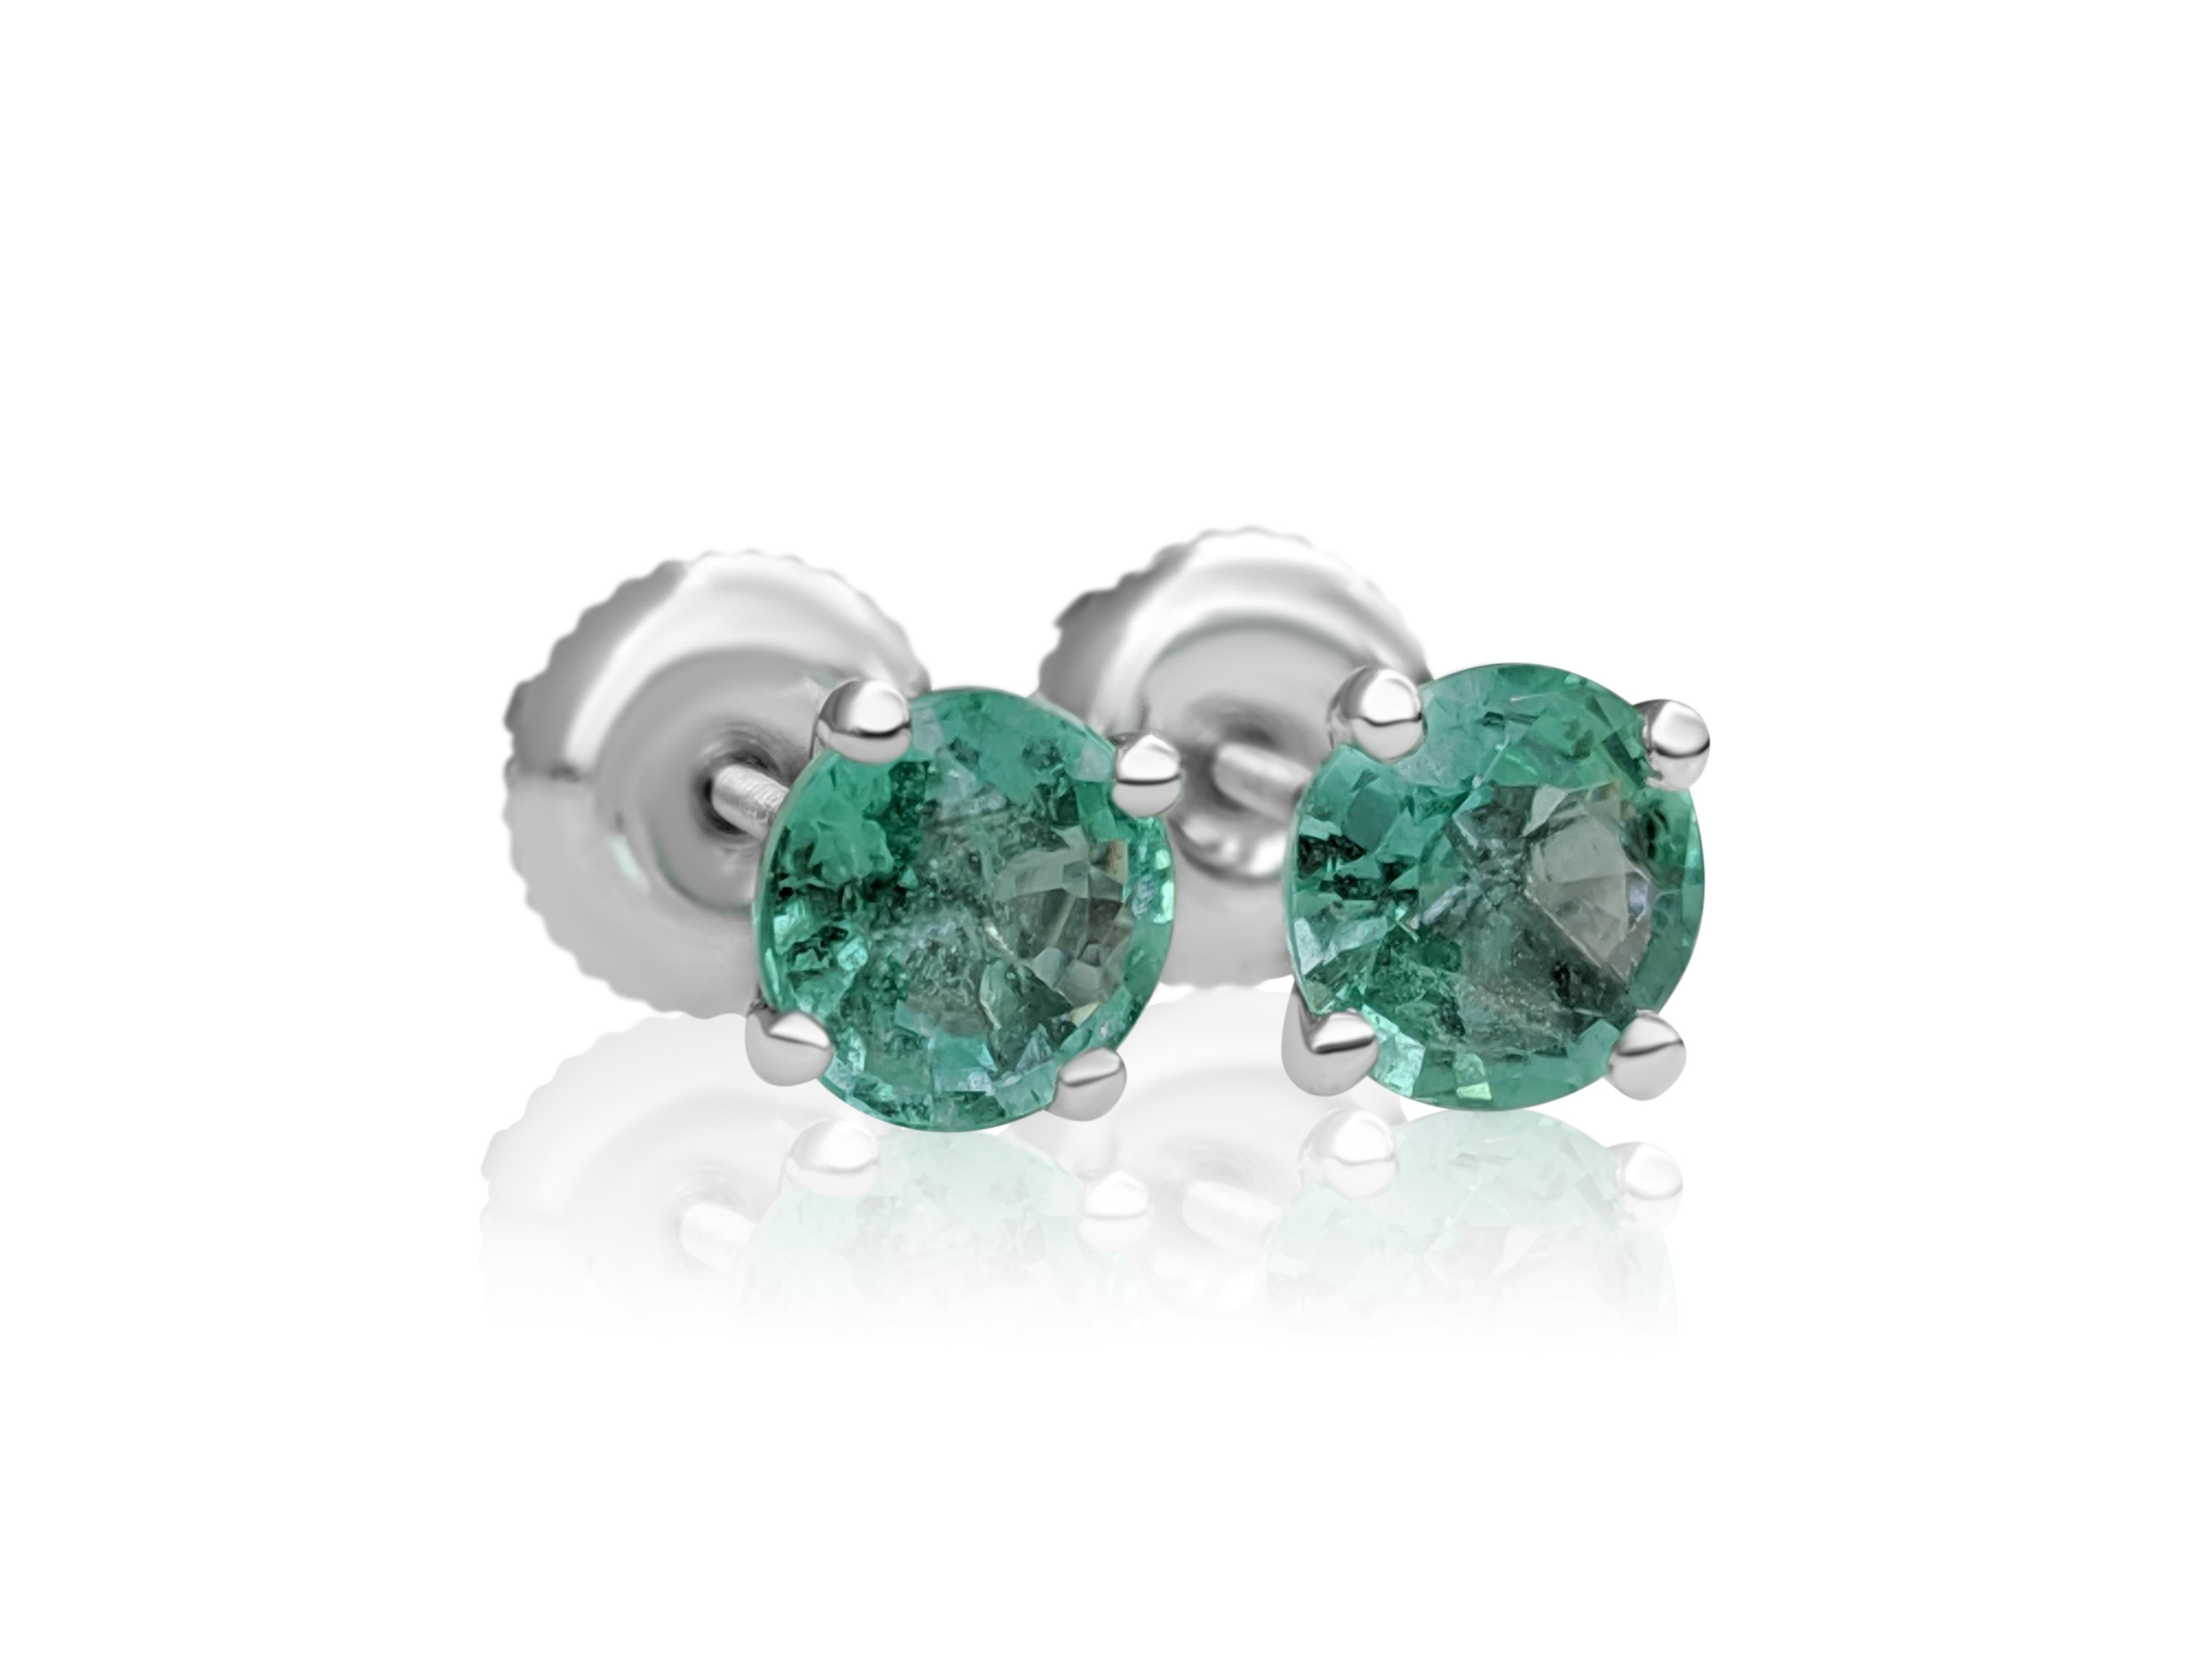 Center Stone:
___________
Natural Emeralds
Cut: Round
Carat: 1.20 tcw / 2 pieces
Color: Green

Size: 5.7 mm

VAT and TAXES:

Please be aware that your country of residence may impose customs and import duties.

Duties and Taxes are not included in